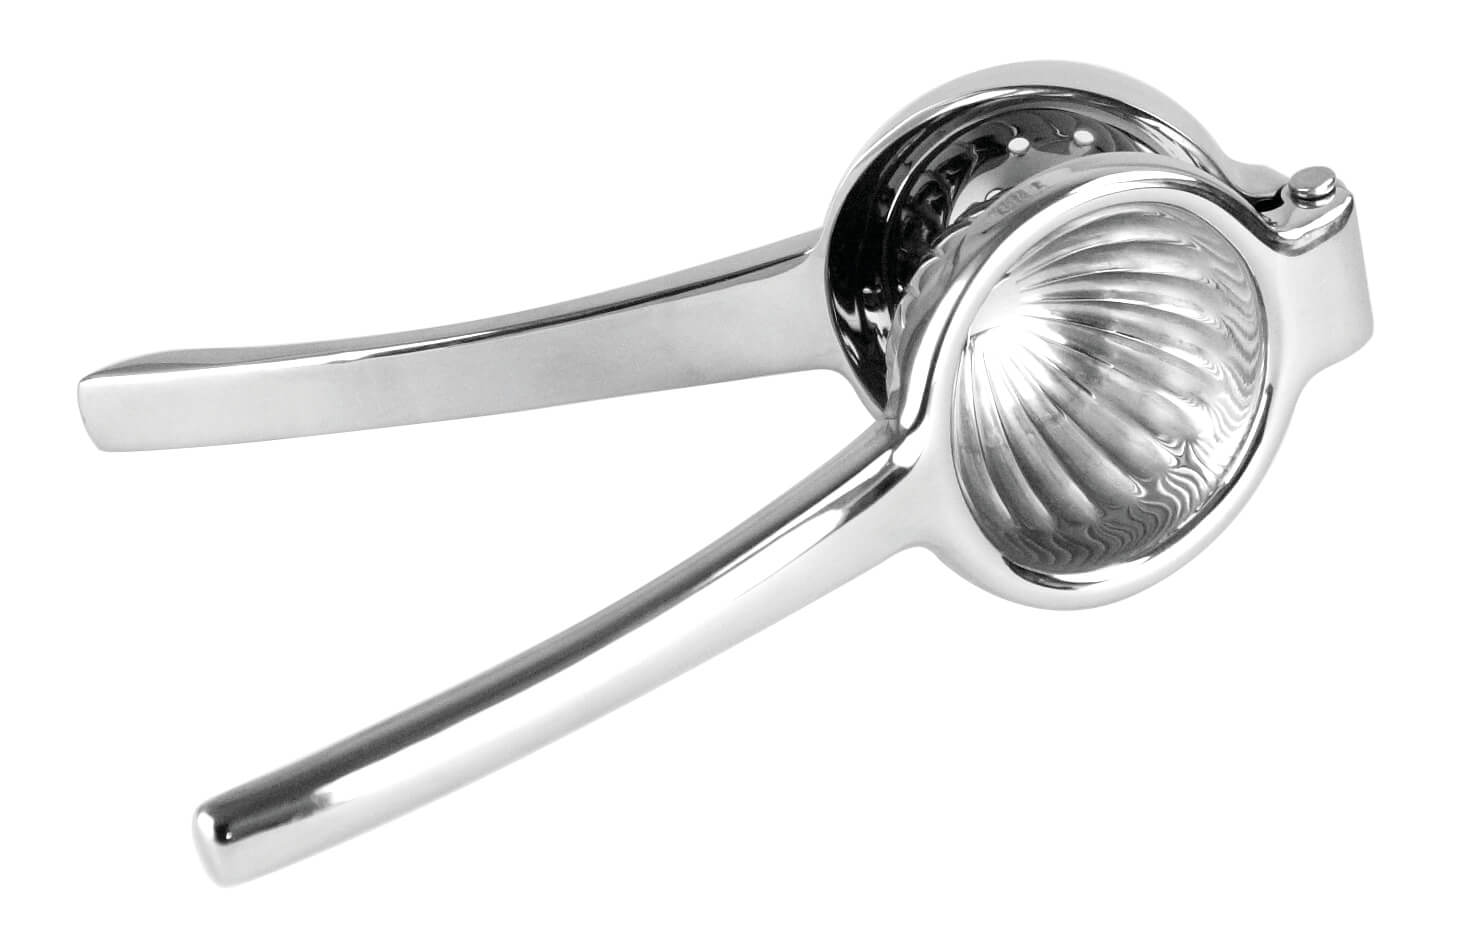 Lime and lemon squeezer - stainless steel (22cm)